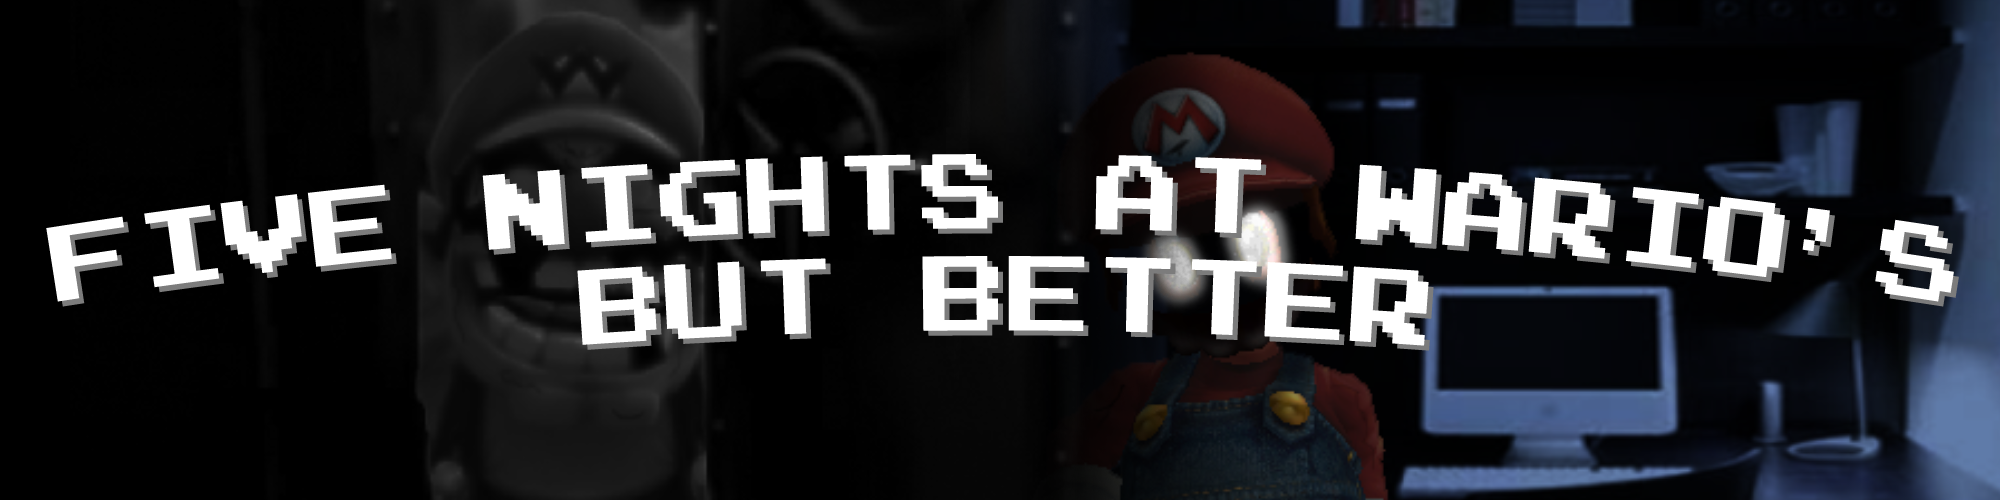 Five Nights at Wario's, But Better